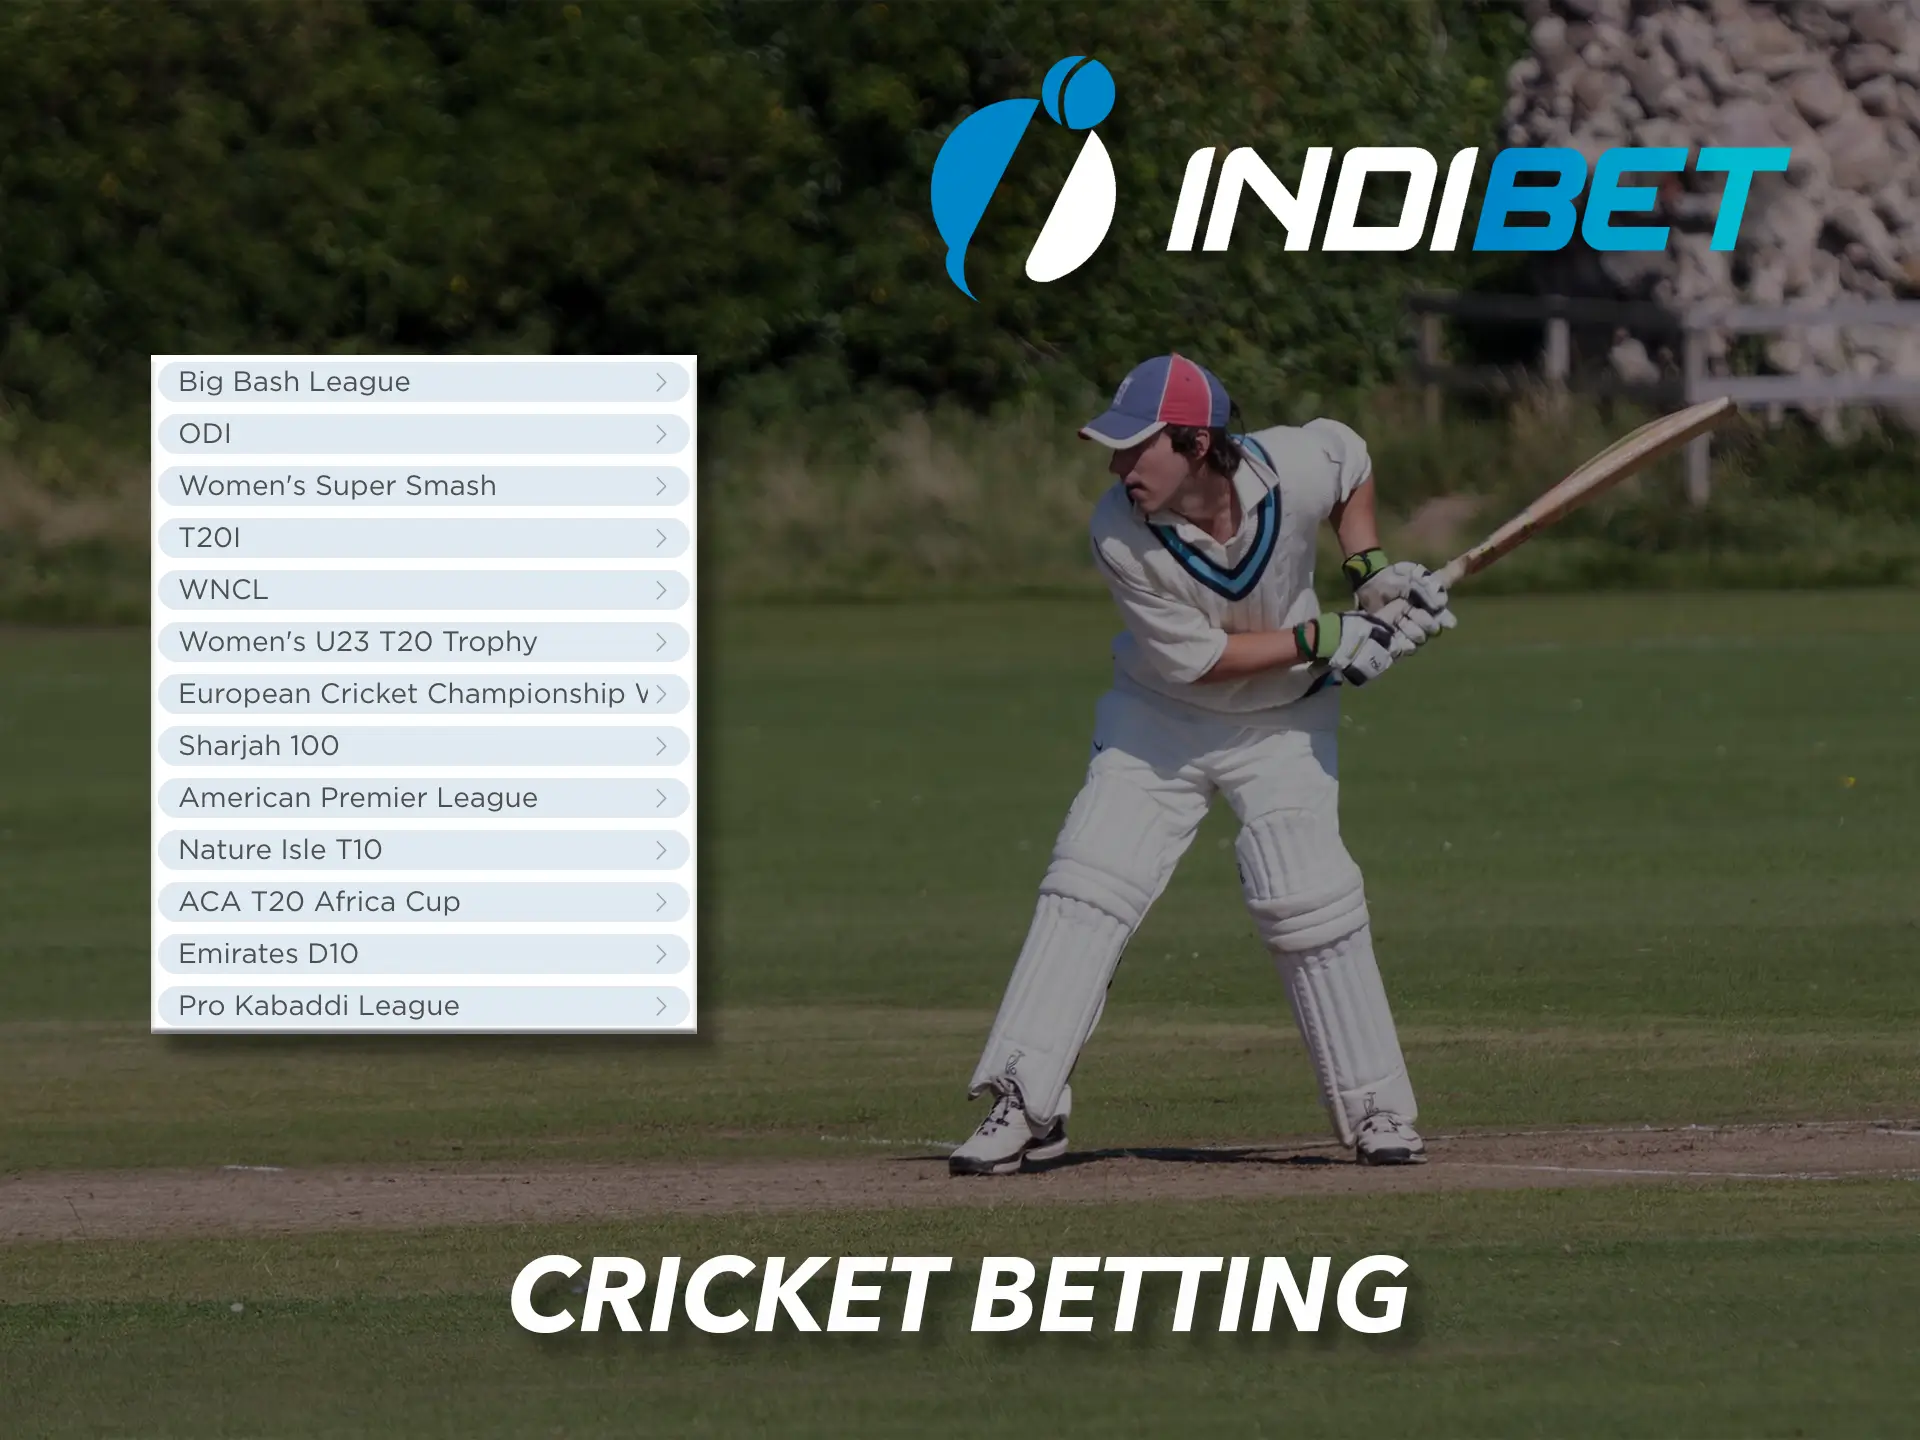 Make your Indibet predictions on tournament cricket events.